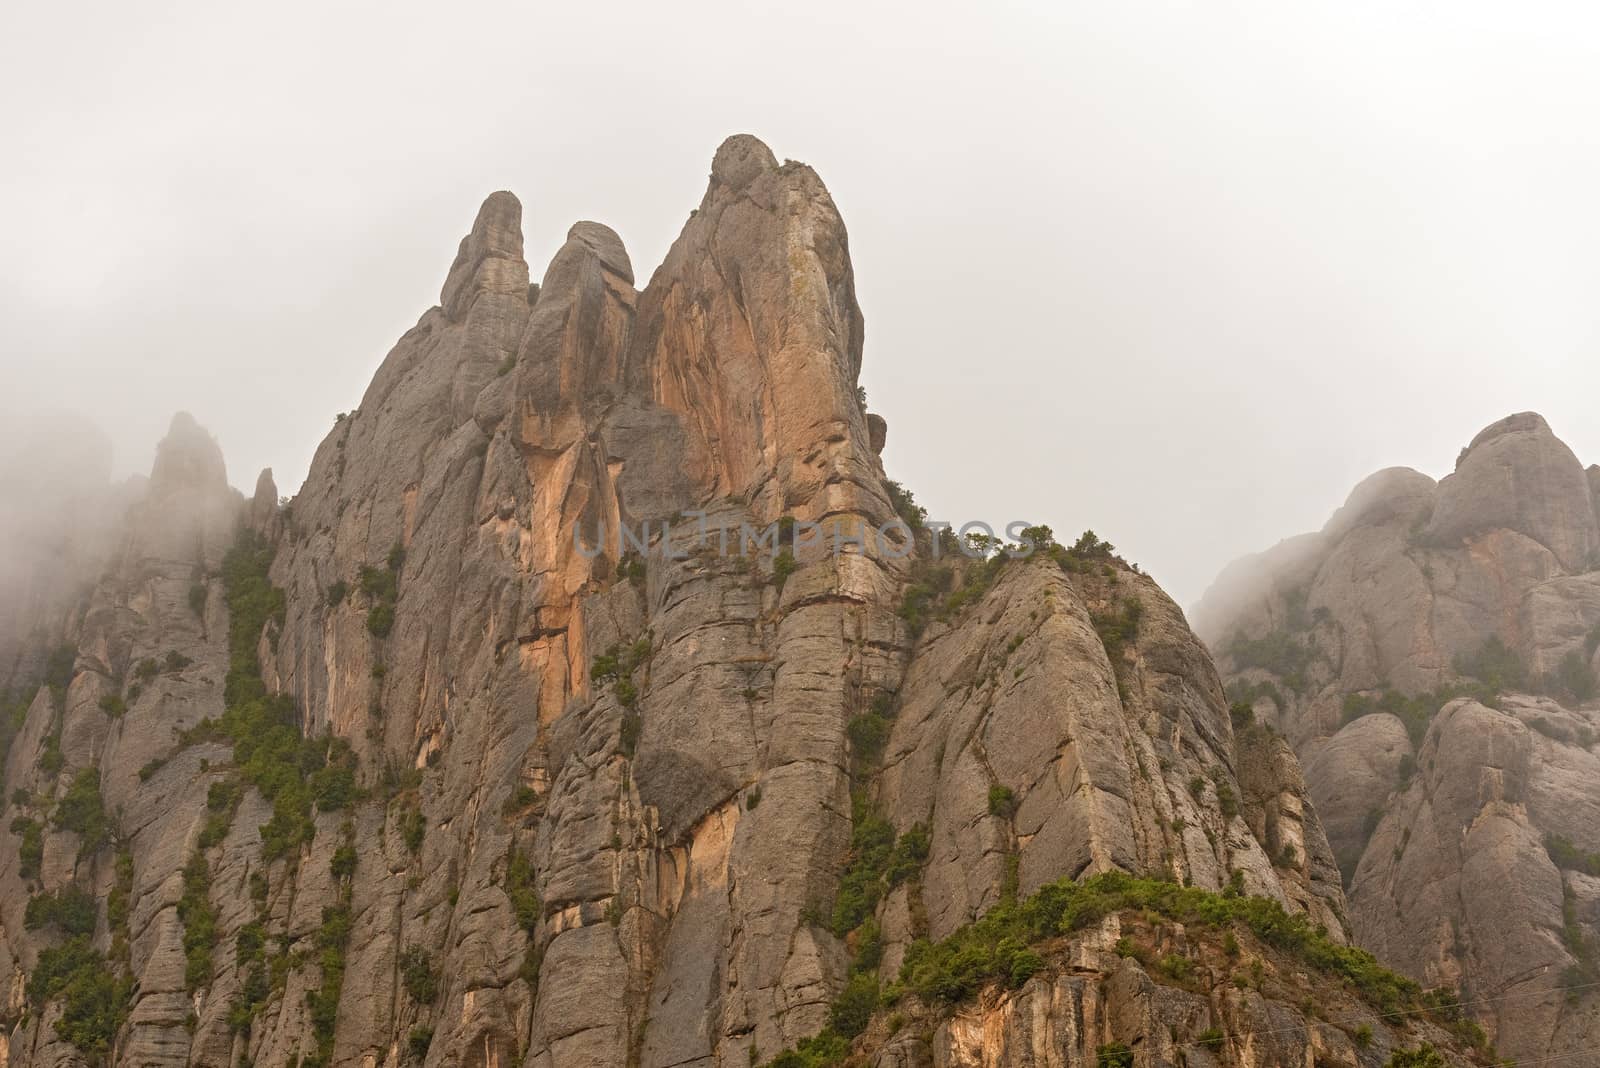  Landscape view at Montserrat. It is a multi-peaked mountain located near the city of Barcelona, in Catalonia, Spain. It is part of the Catalan Pre-Coastal Range.